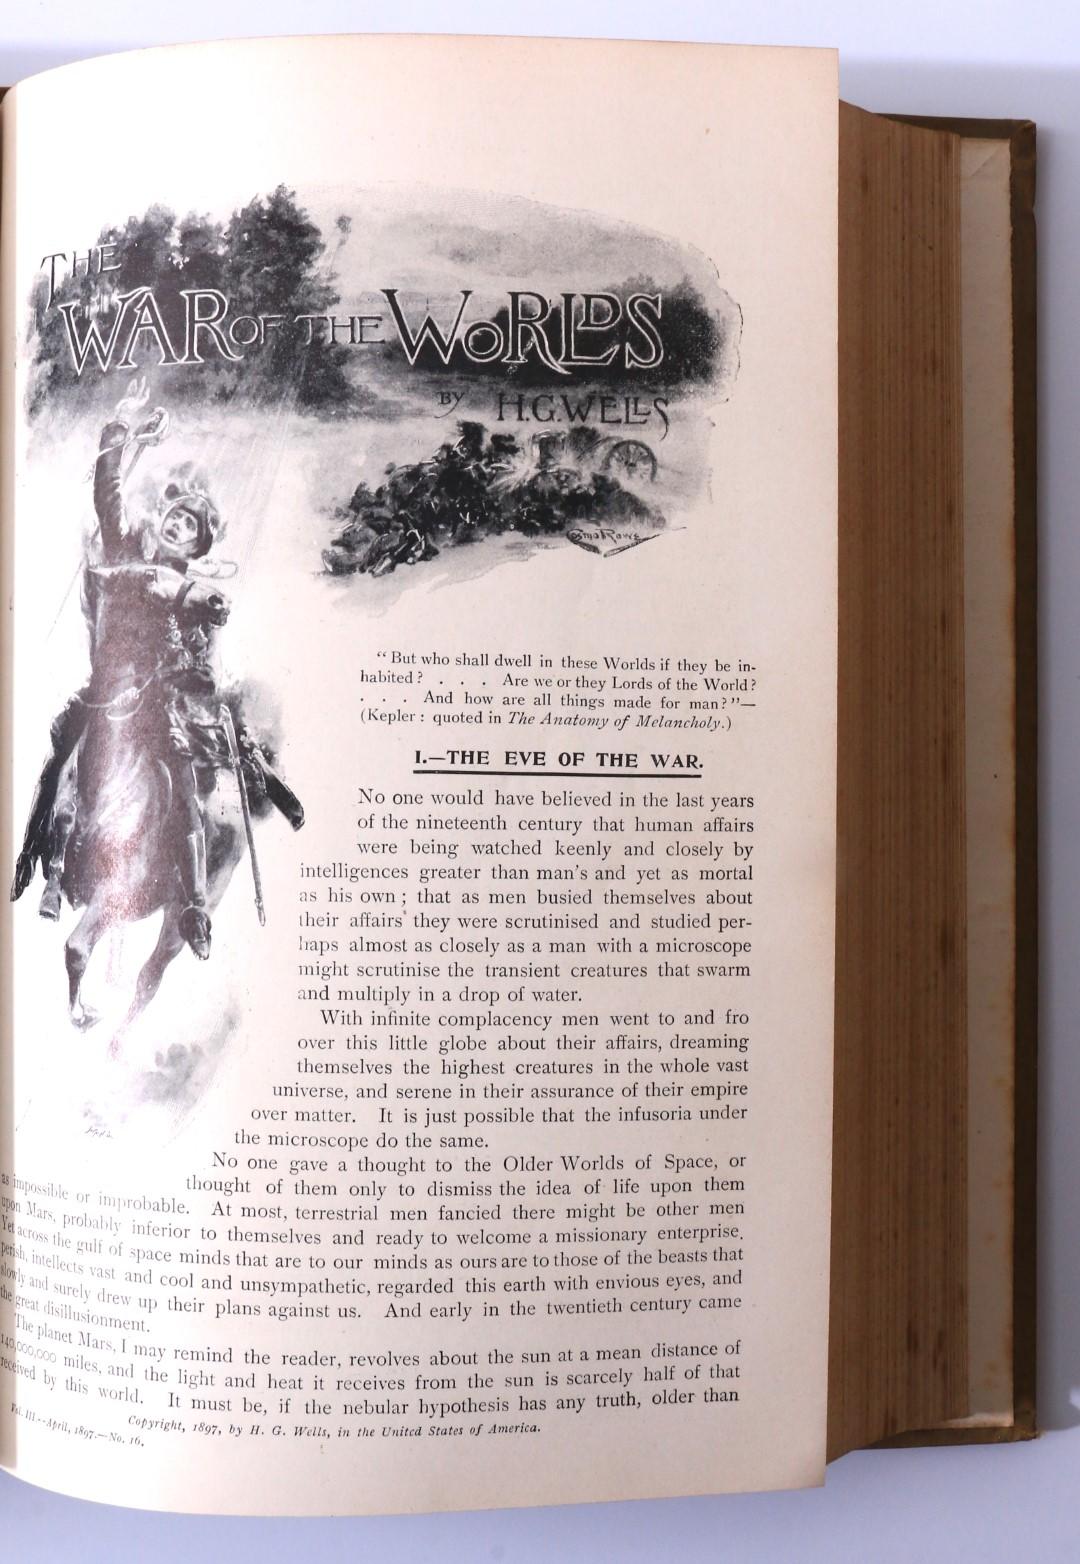 H.G. Wells - War of the Worlds [in] Pearson's Magazine - Arthur Pearson, 1897, First Edition.